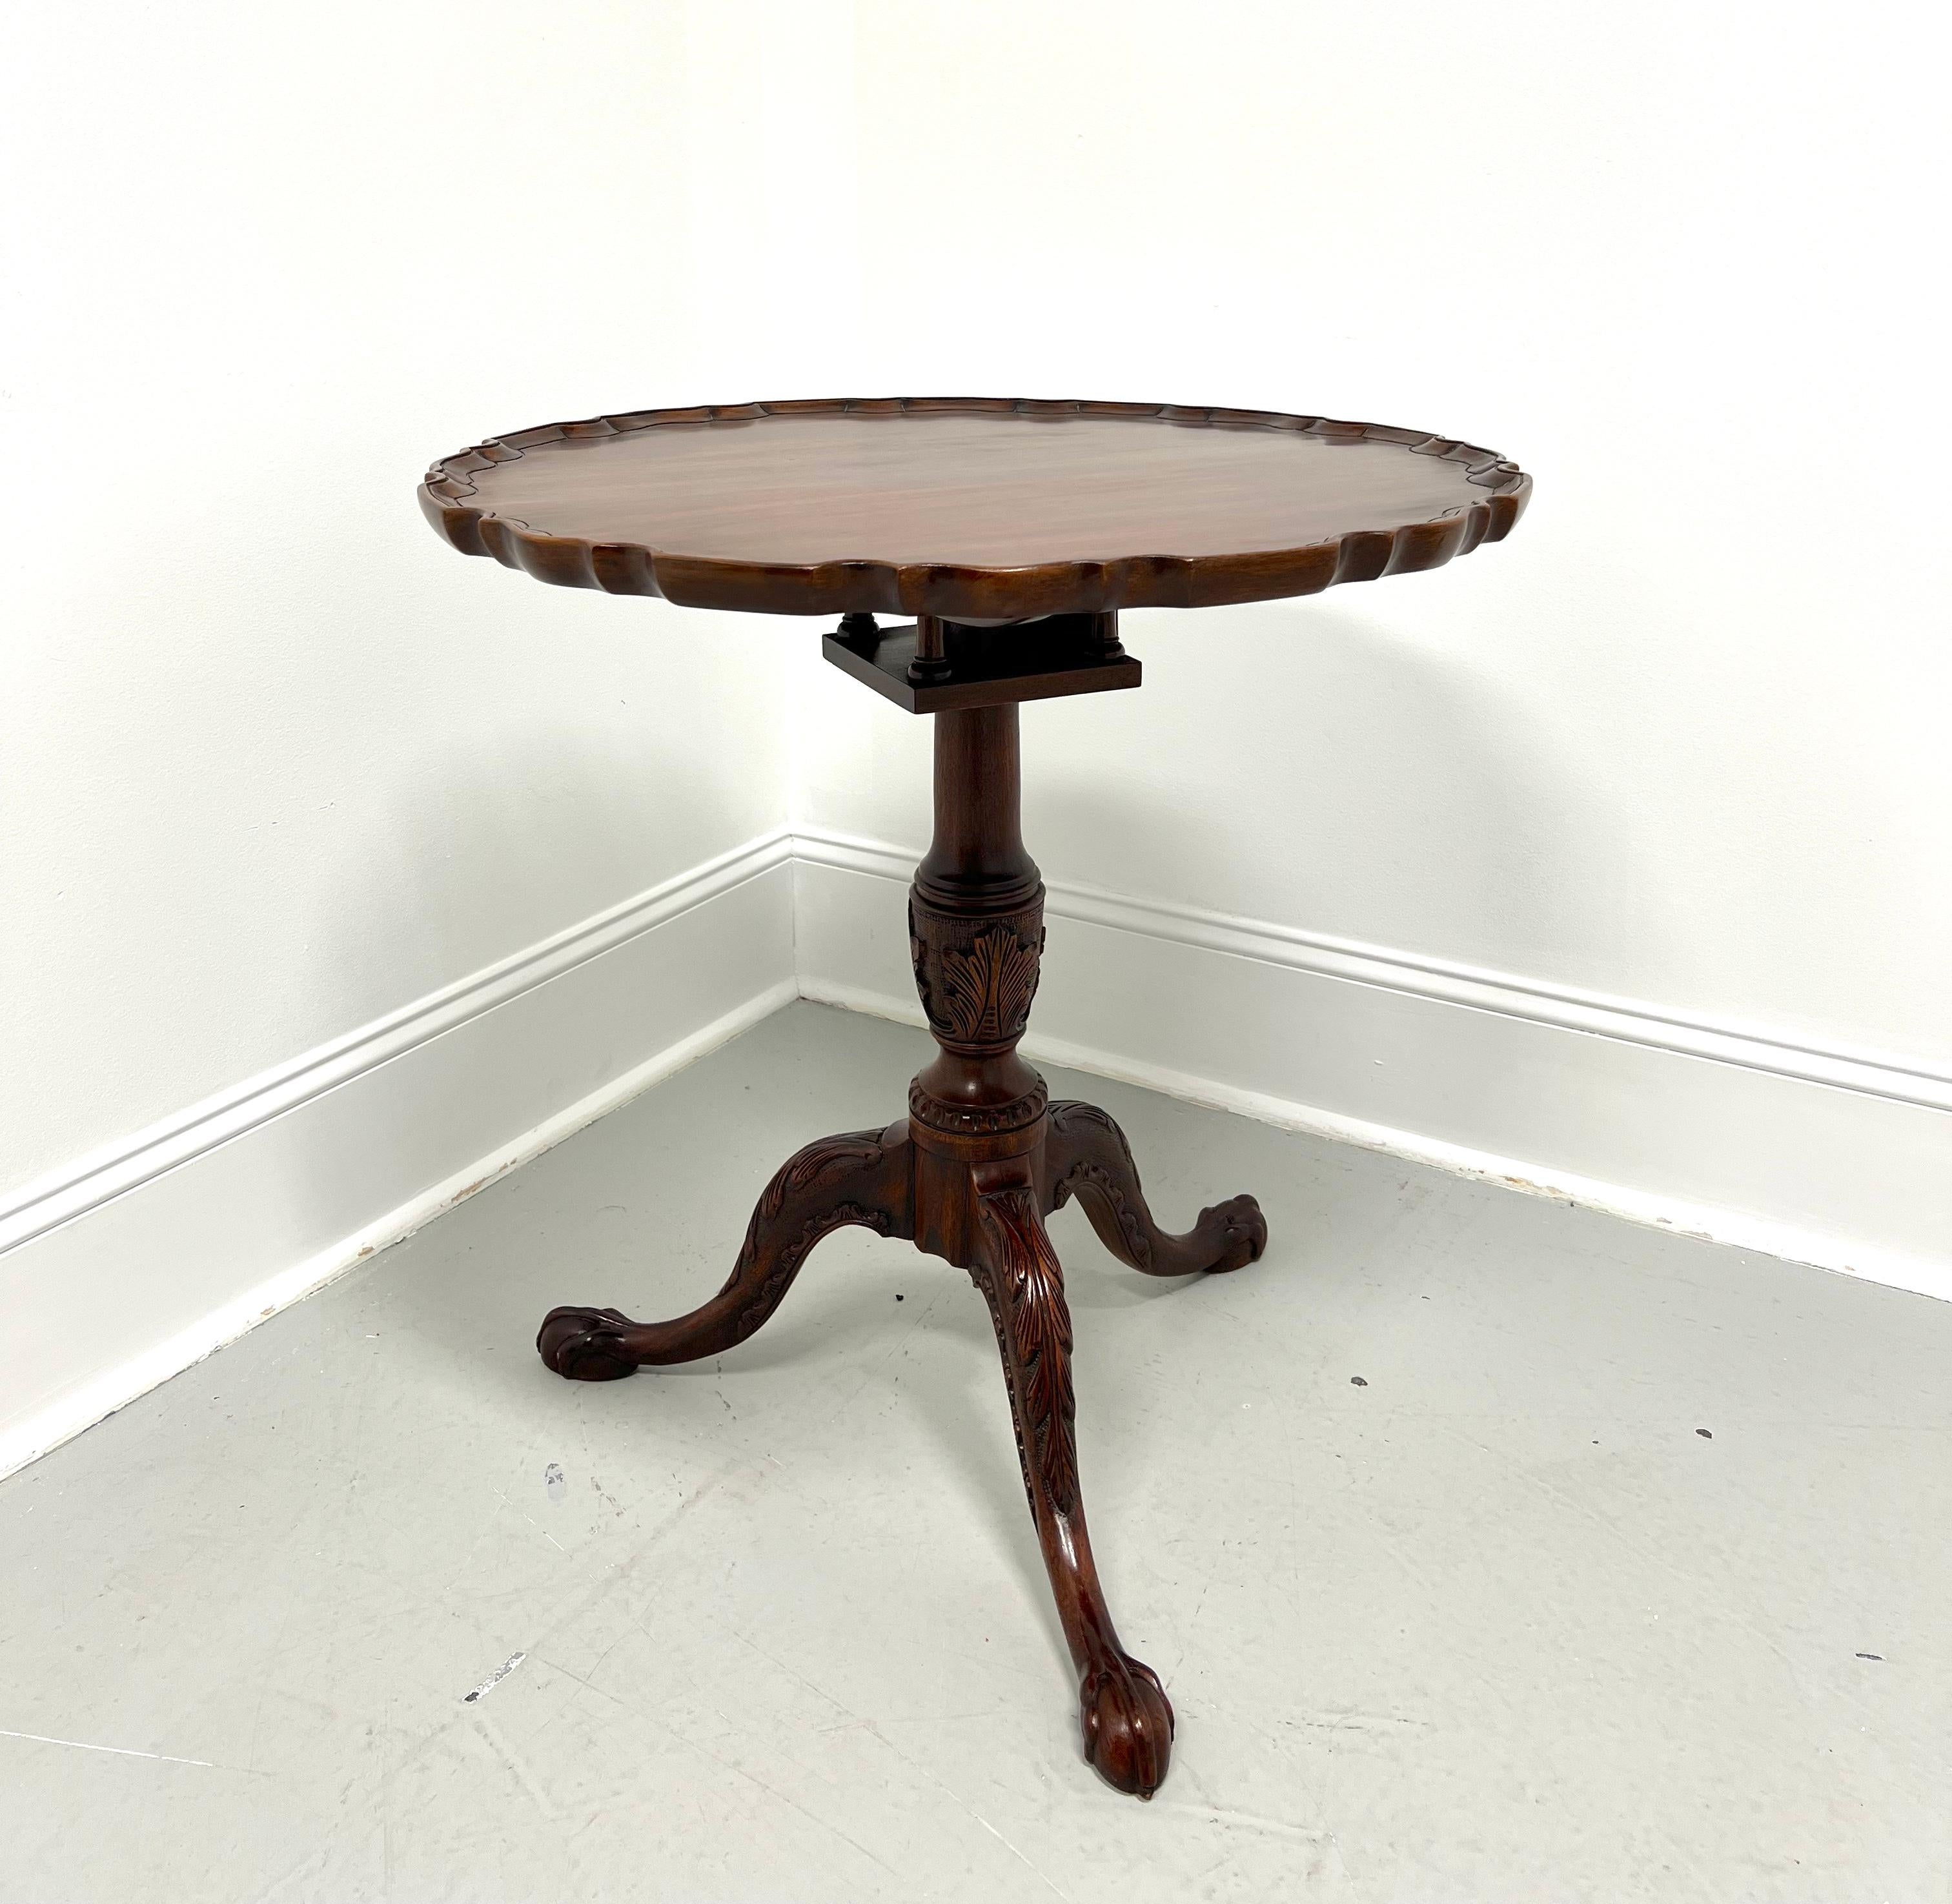 HENKEL HARRIS 5435 29 Mahogany Chippendale Tilt-Top Pie Crust Table In Good Condition For Sale In Charlotte, NC